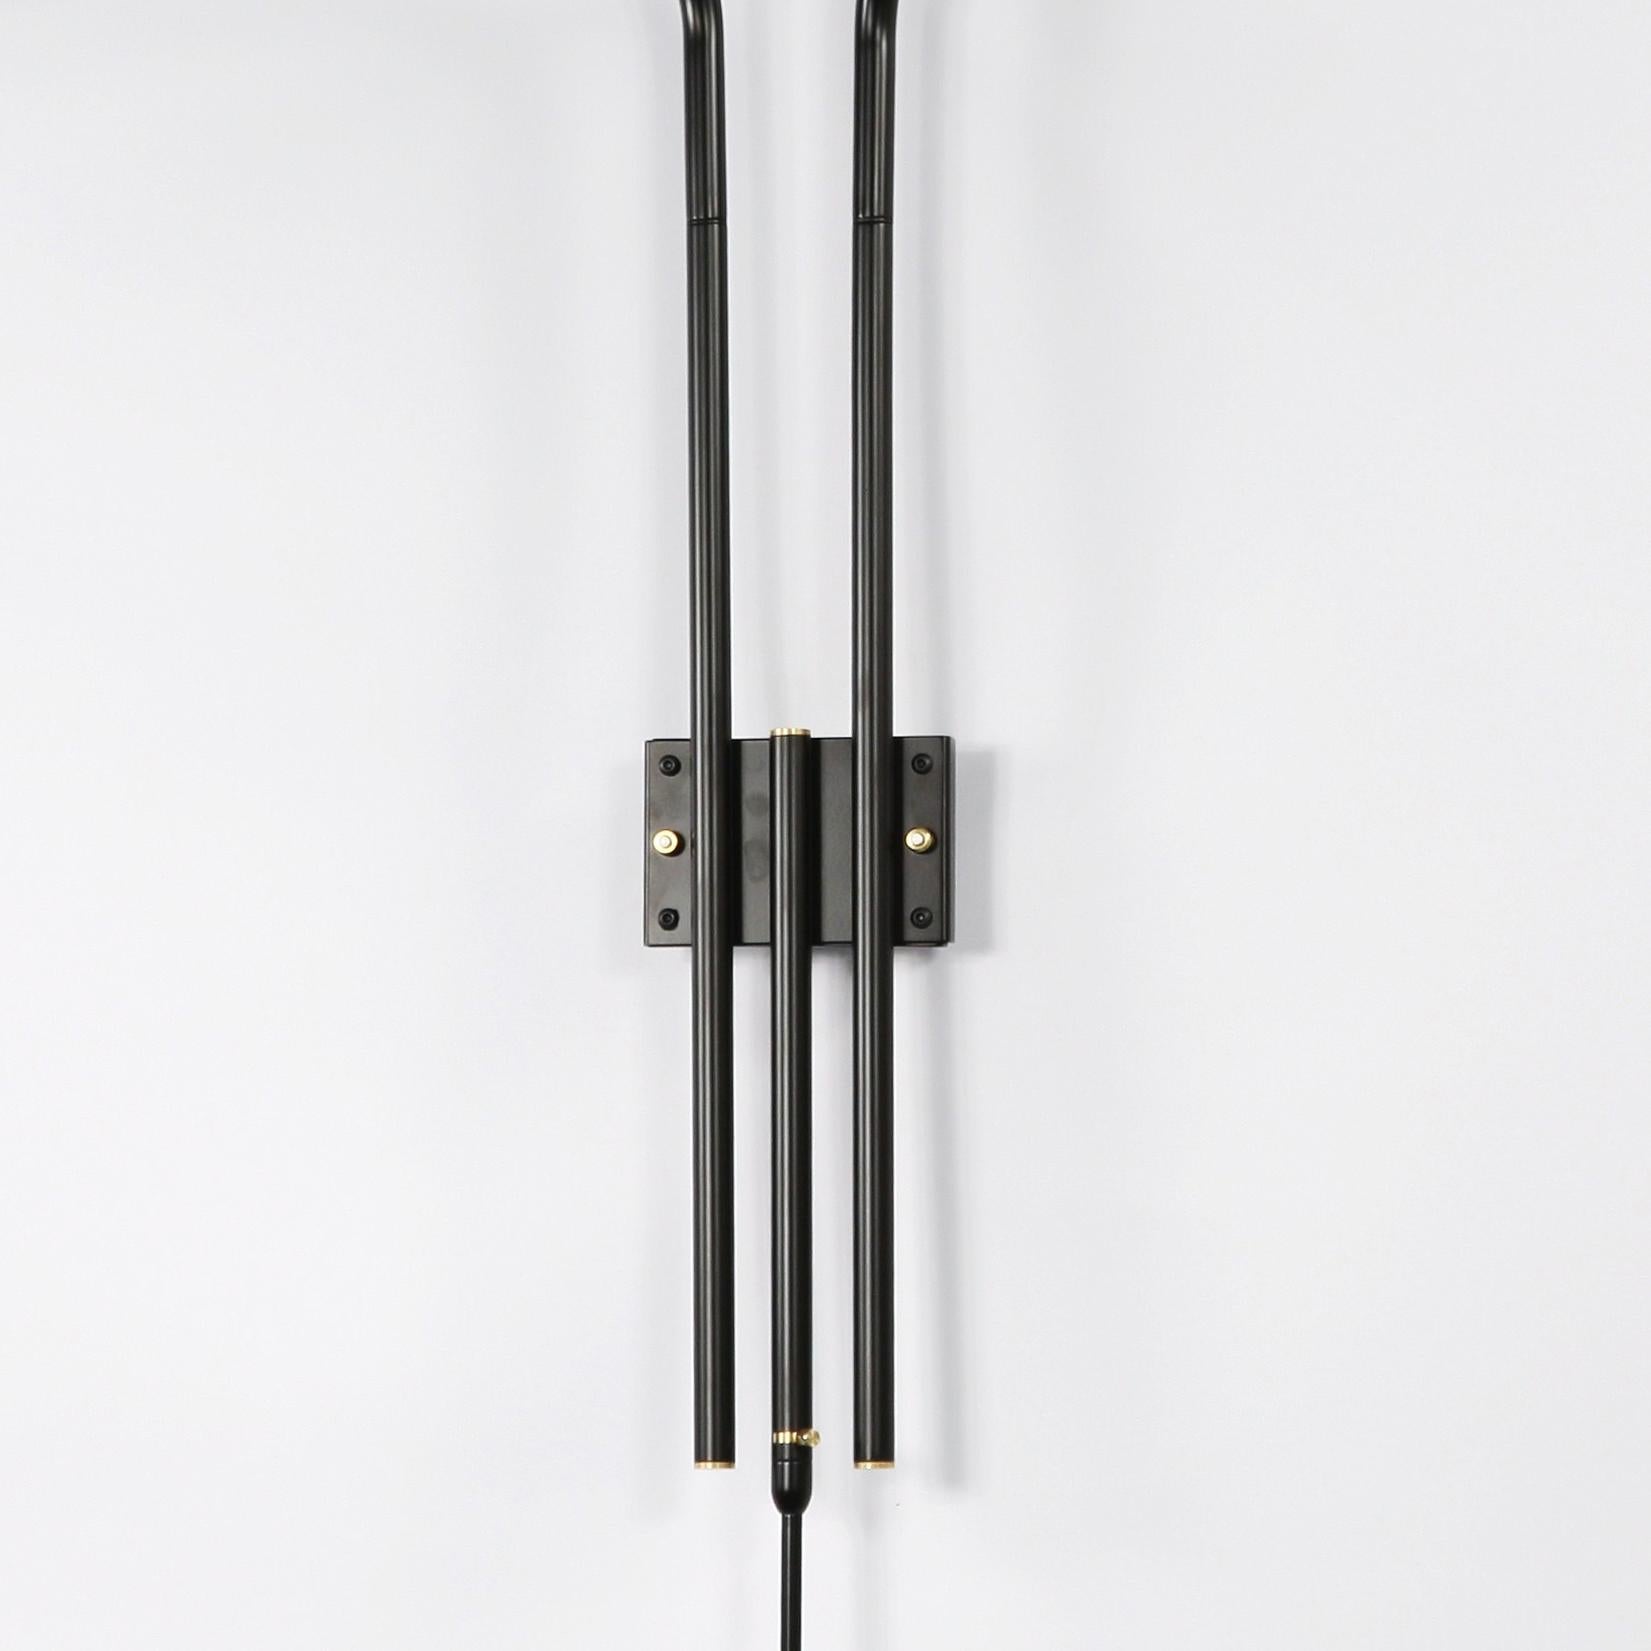 Serge Mouille Black Three Rotating Straight Arms Wall Lamp, Re-Edition For Sale 2